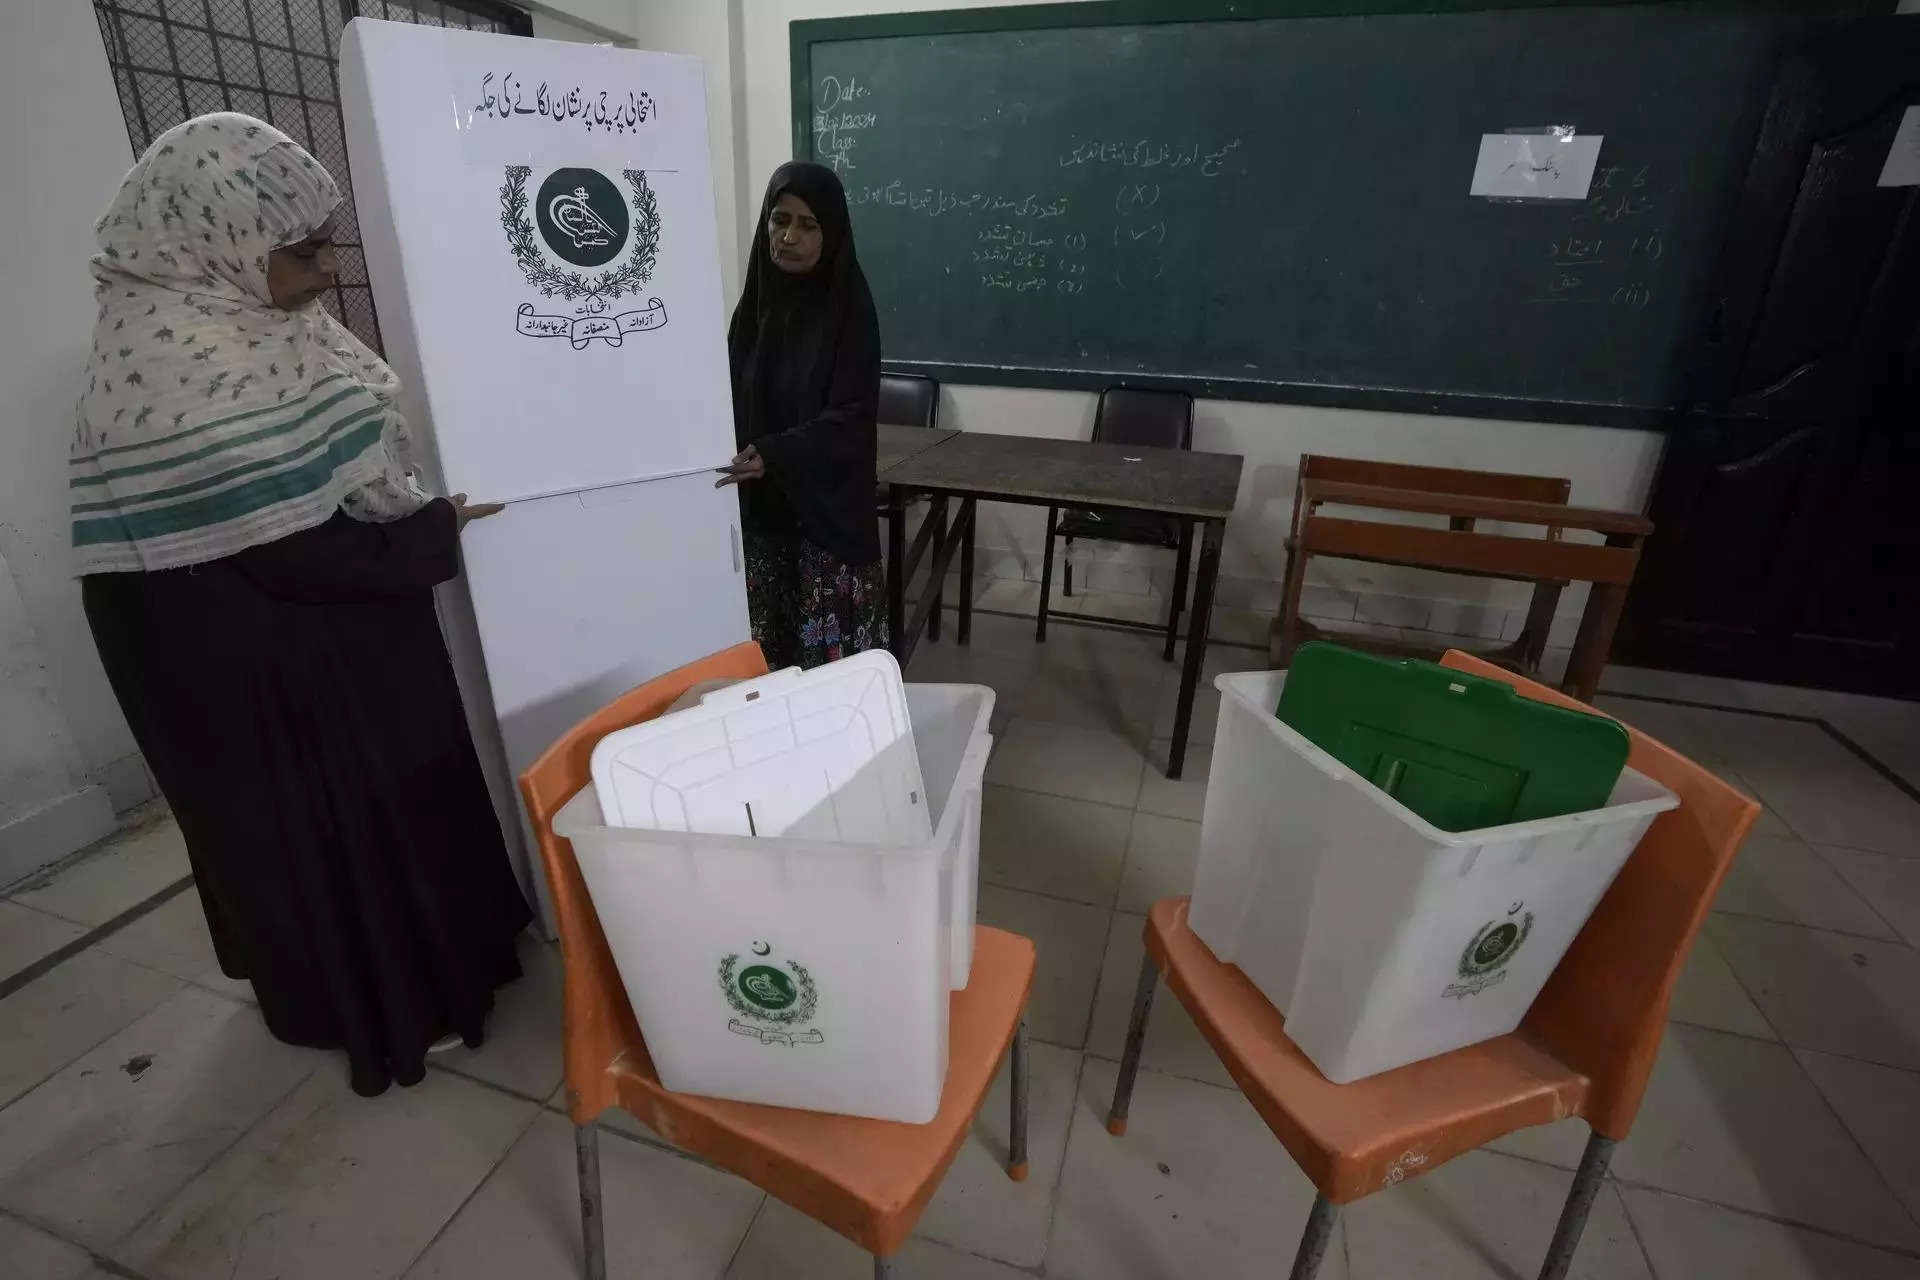 US diplomat Lu urges Pakistan to probe election, possibly re-run some votes